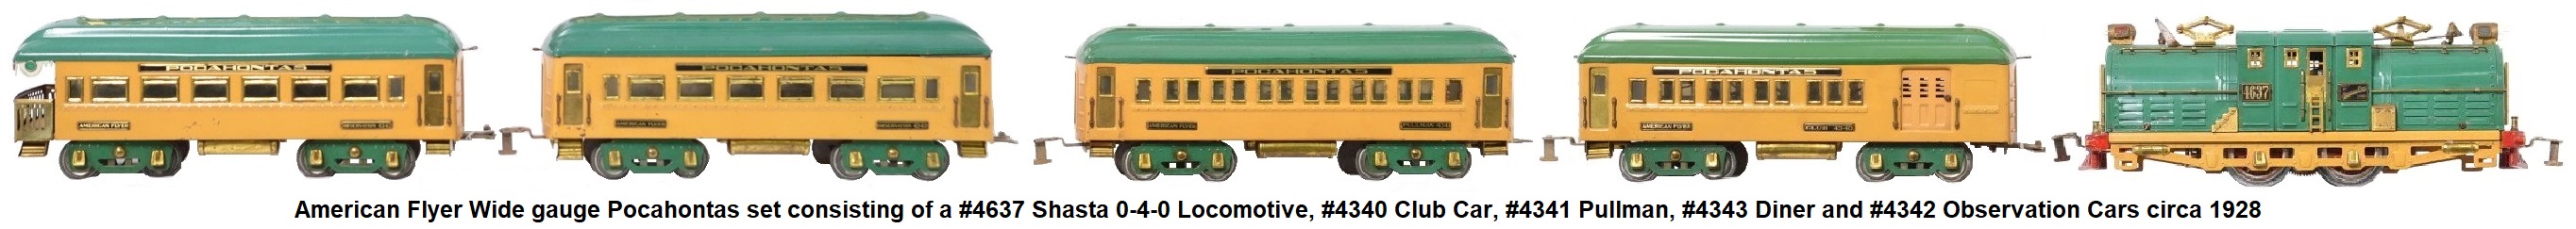 American Flyer Wide gauge Pocahontas set consisting of a #4637 Shasta 0-4-0 locomotive, #4340 club, #4341 Pullman #4343 Diner and #4342 observation cars circa 1928